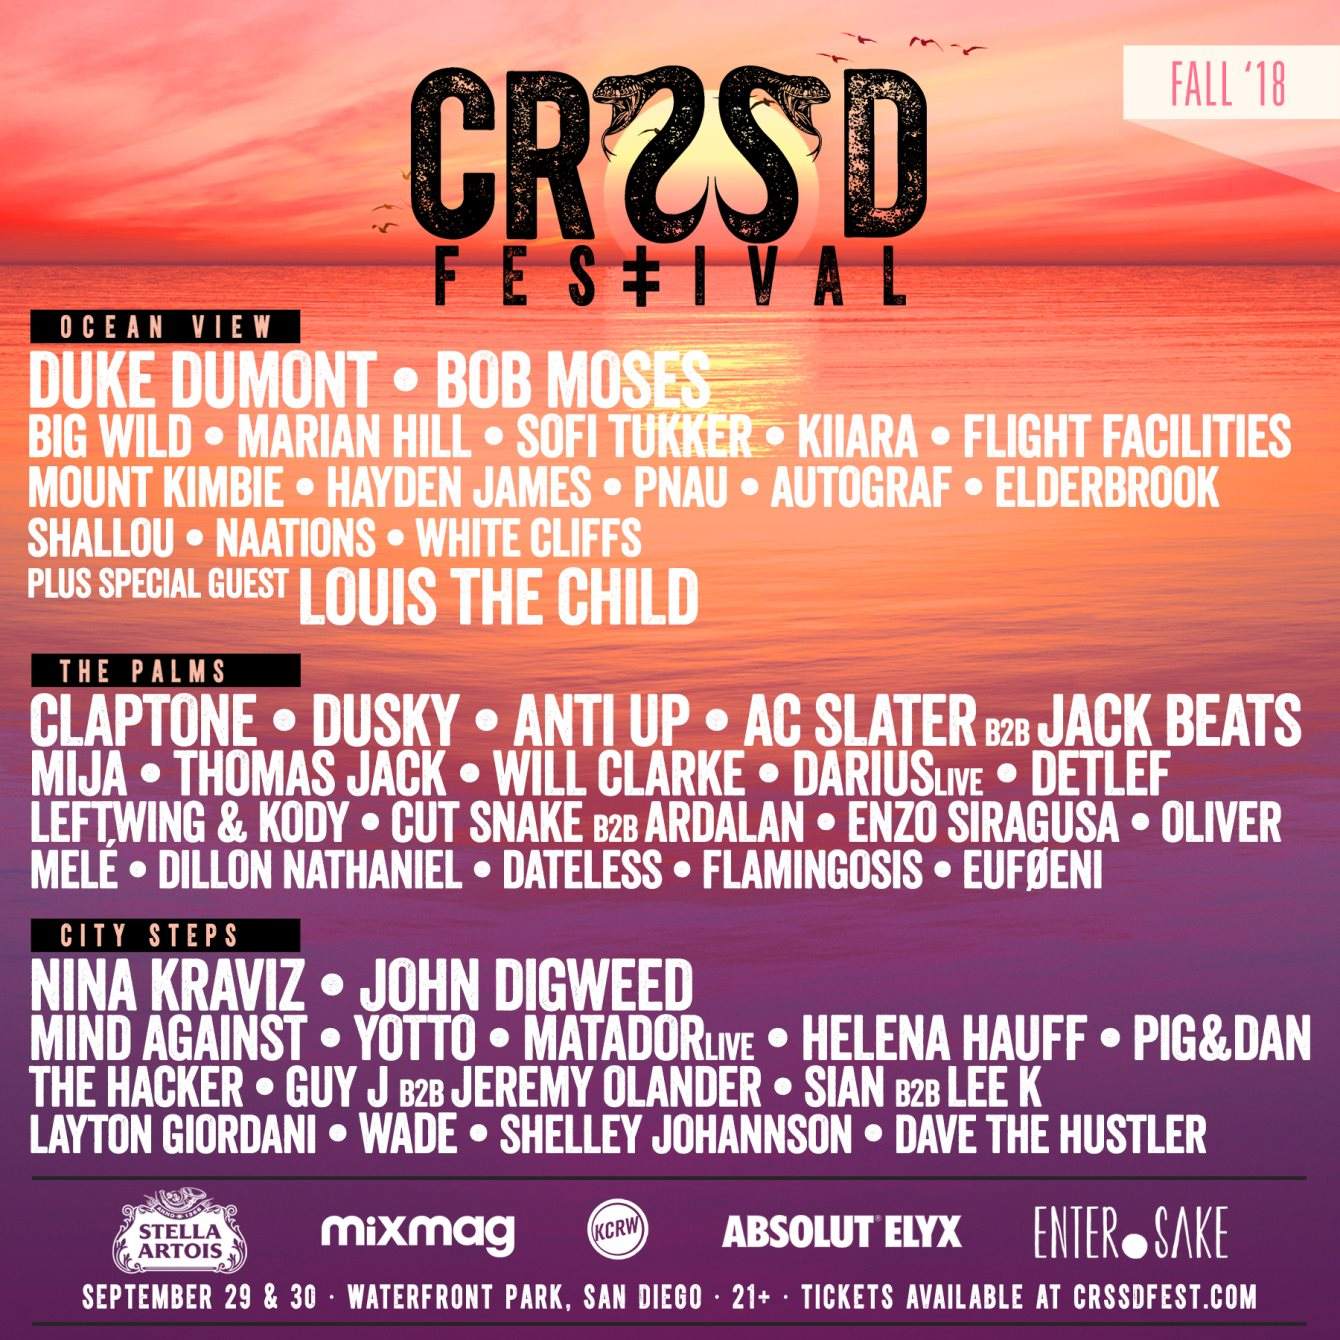 Crssd Festival presented by FNGRS CRSSD - フライヤー表